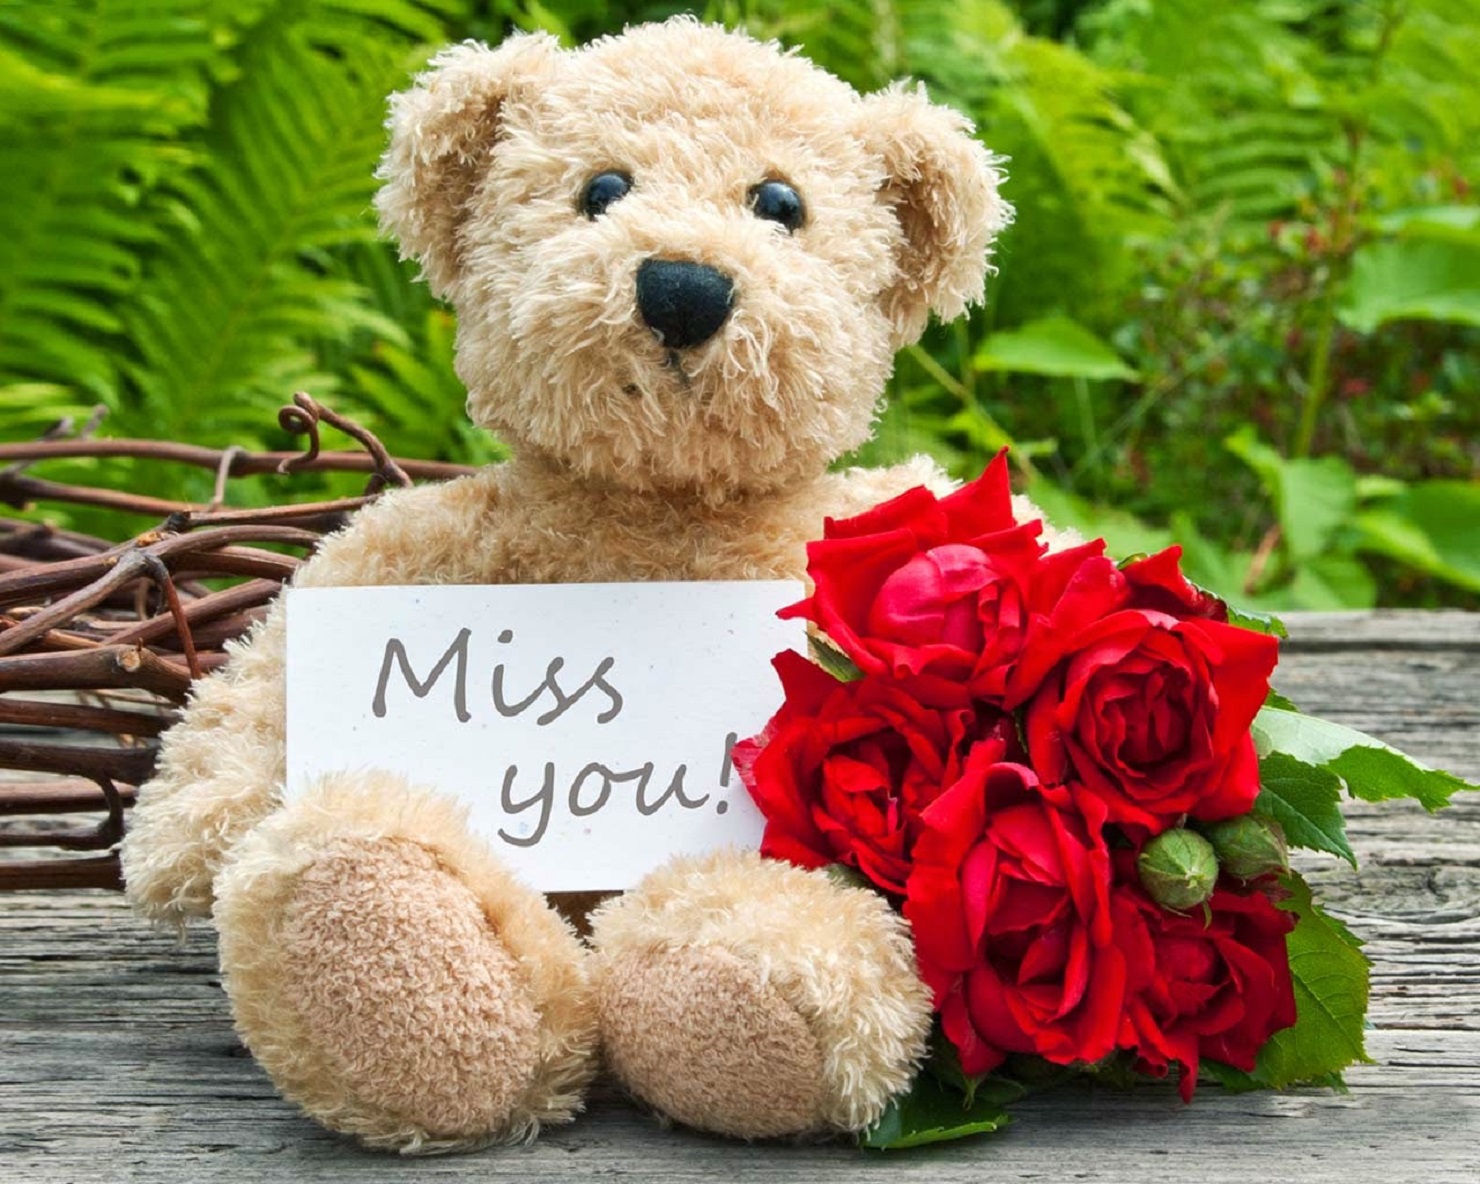 I Miss You Images, Pictures & HD Wallpapers 2017